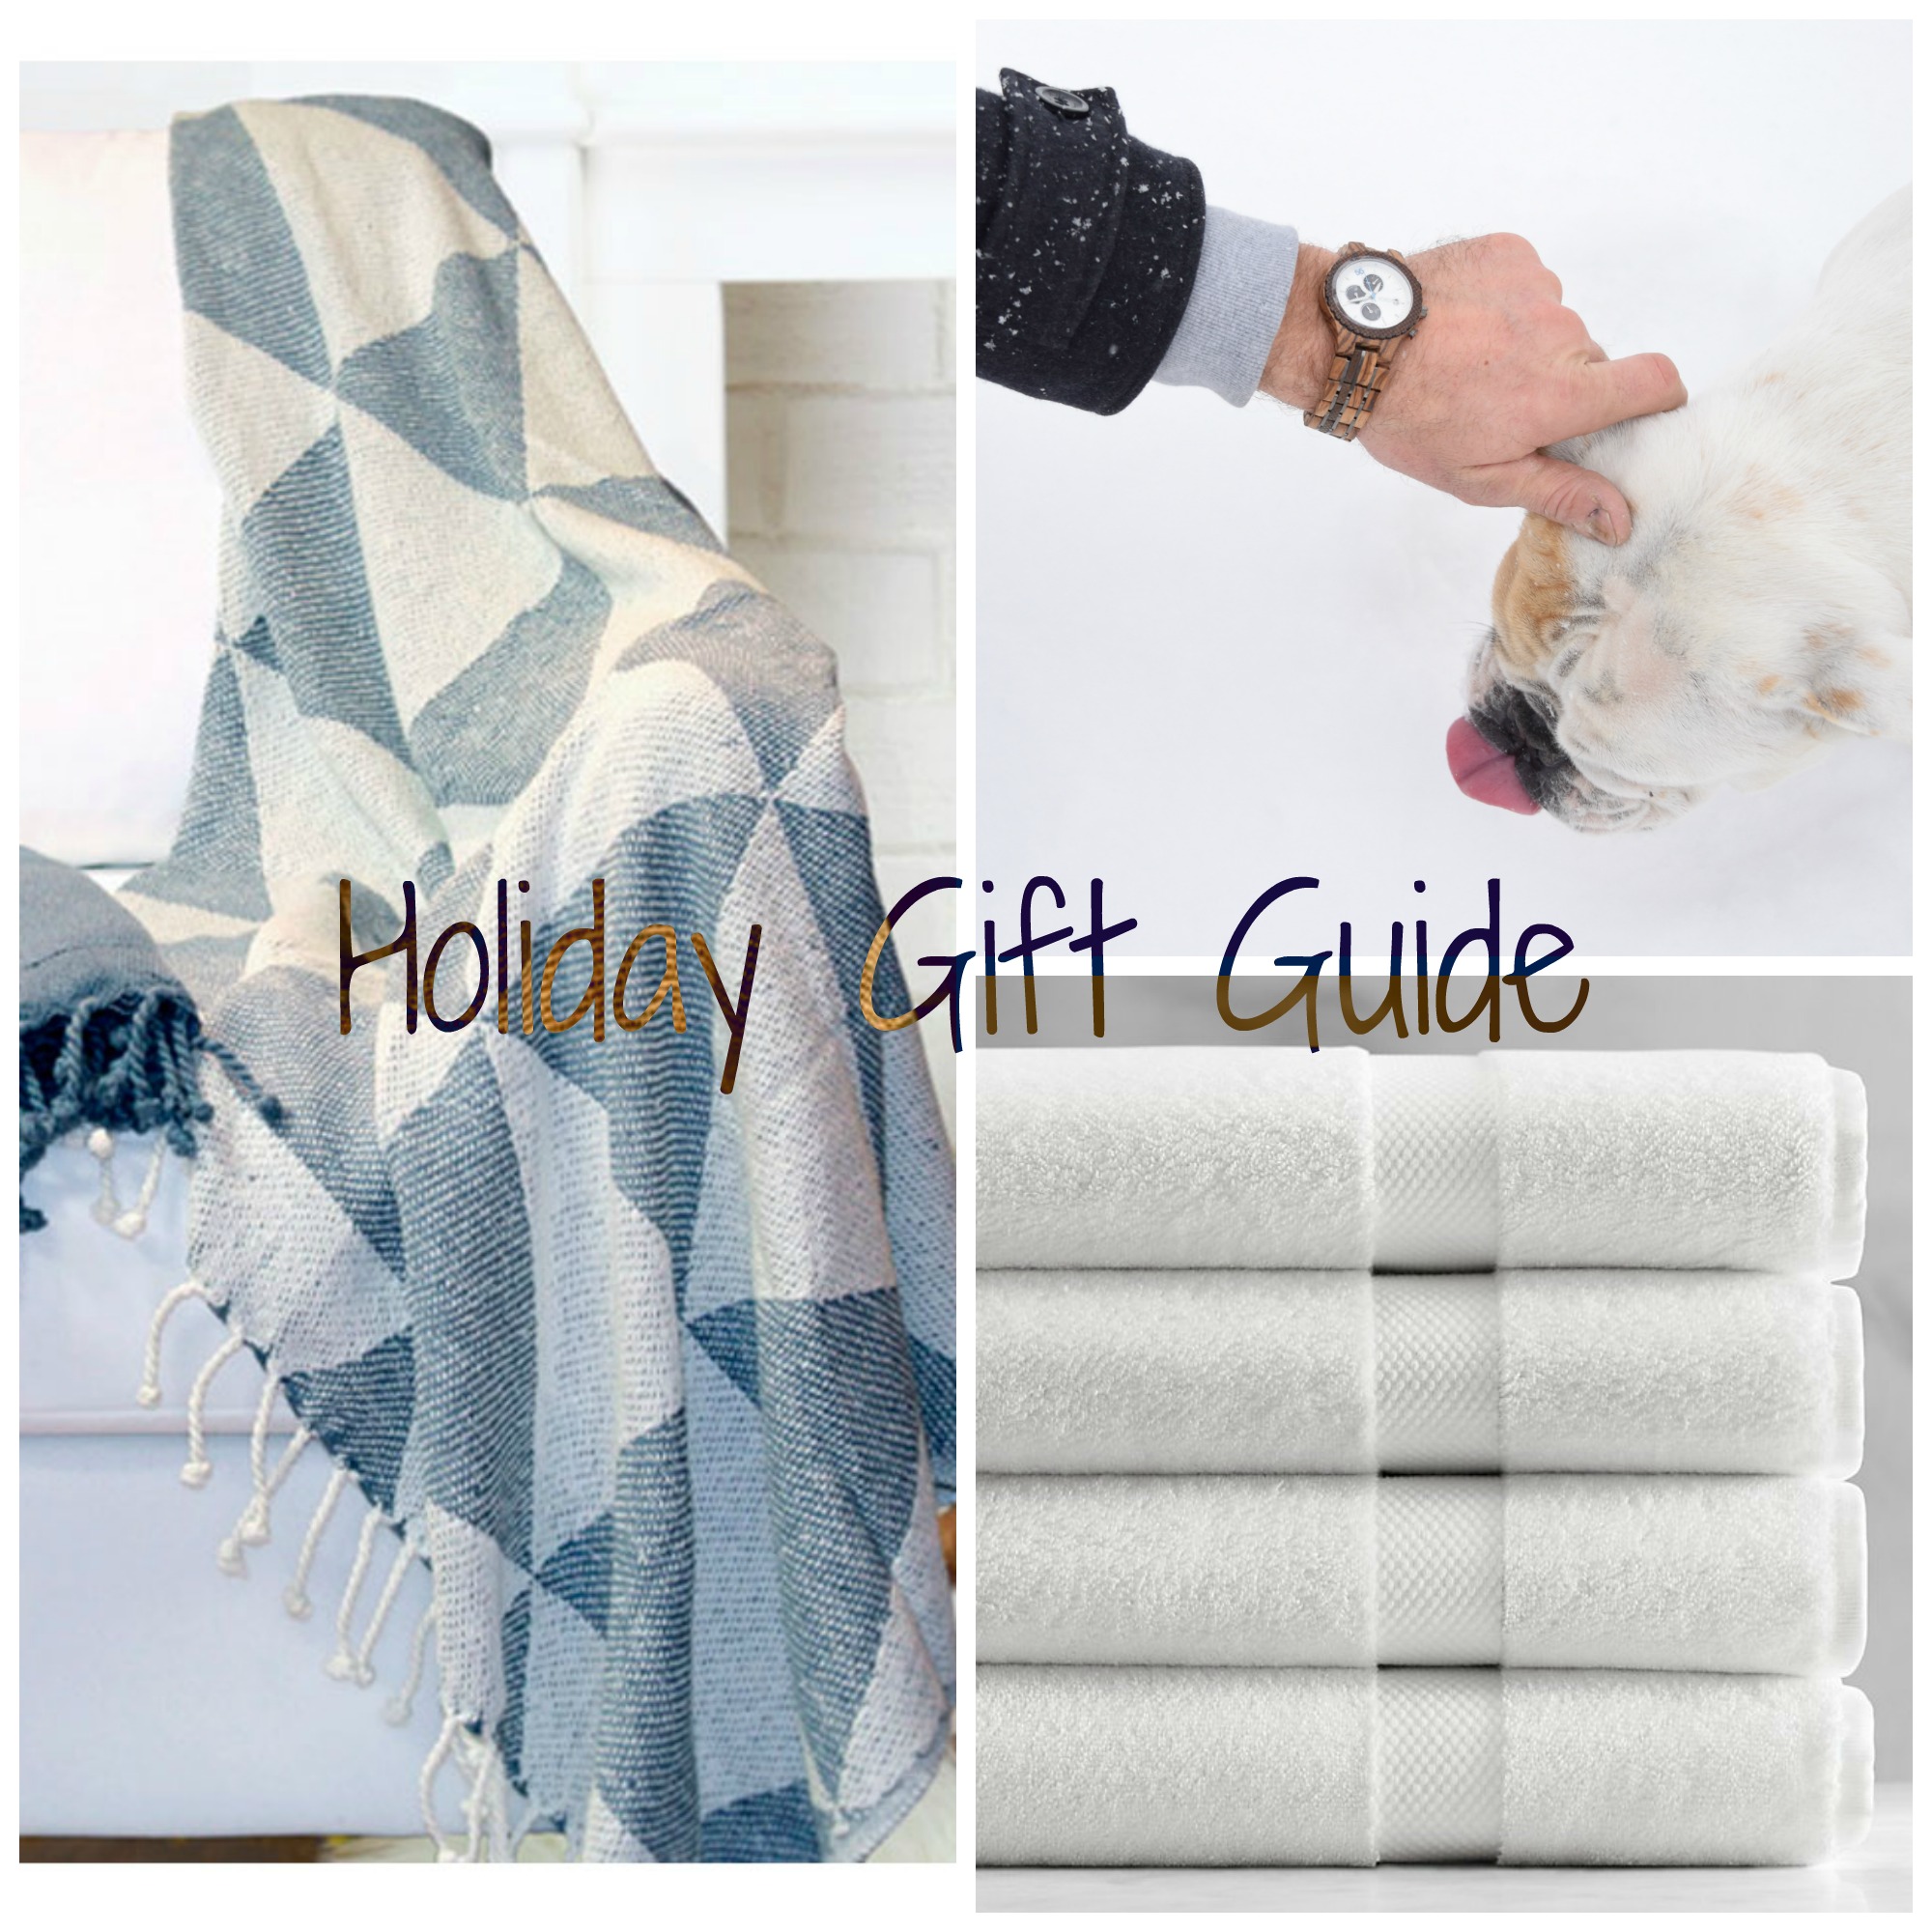 holiday spirit, giving guide, mens watch, wood watch, holiday 2016, holiday gift guide, holiday gift, adorned homes, katie kurtz, christmas, christmas season, christmas gift ideas, luxury gifts, luxury, bath towels, bath accessories, luxe lifestyle, luxury gifts, throws, accent blankets, home design, bellacor, christmas 2016, gift guide 2016